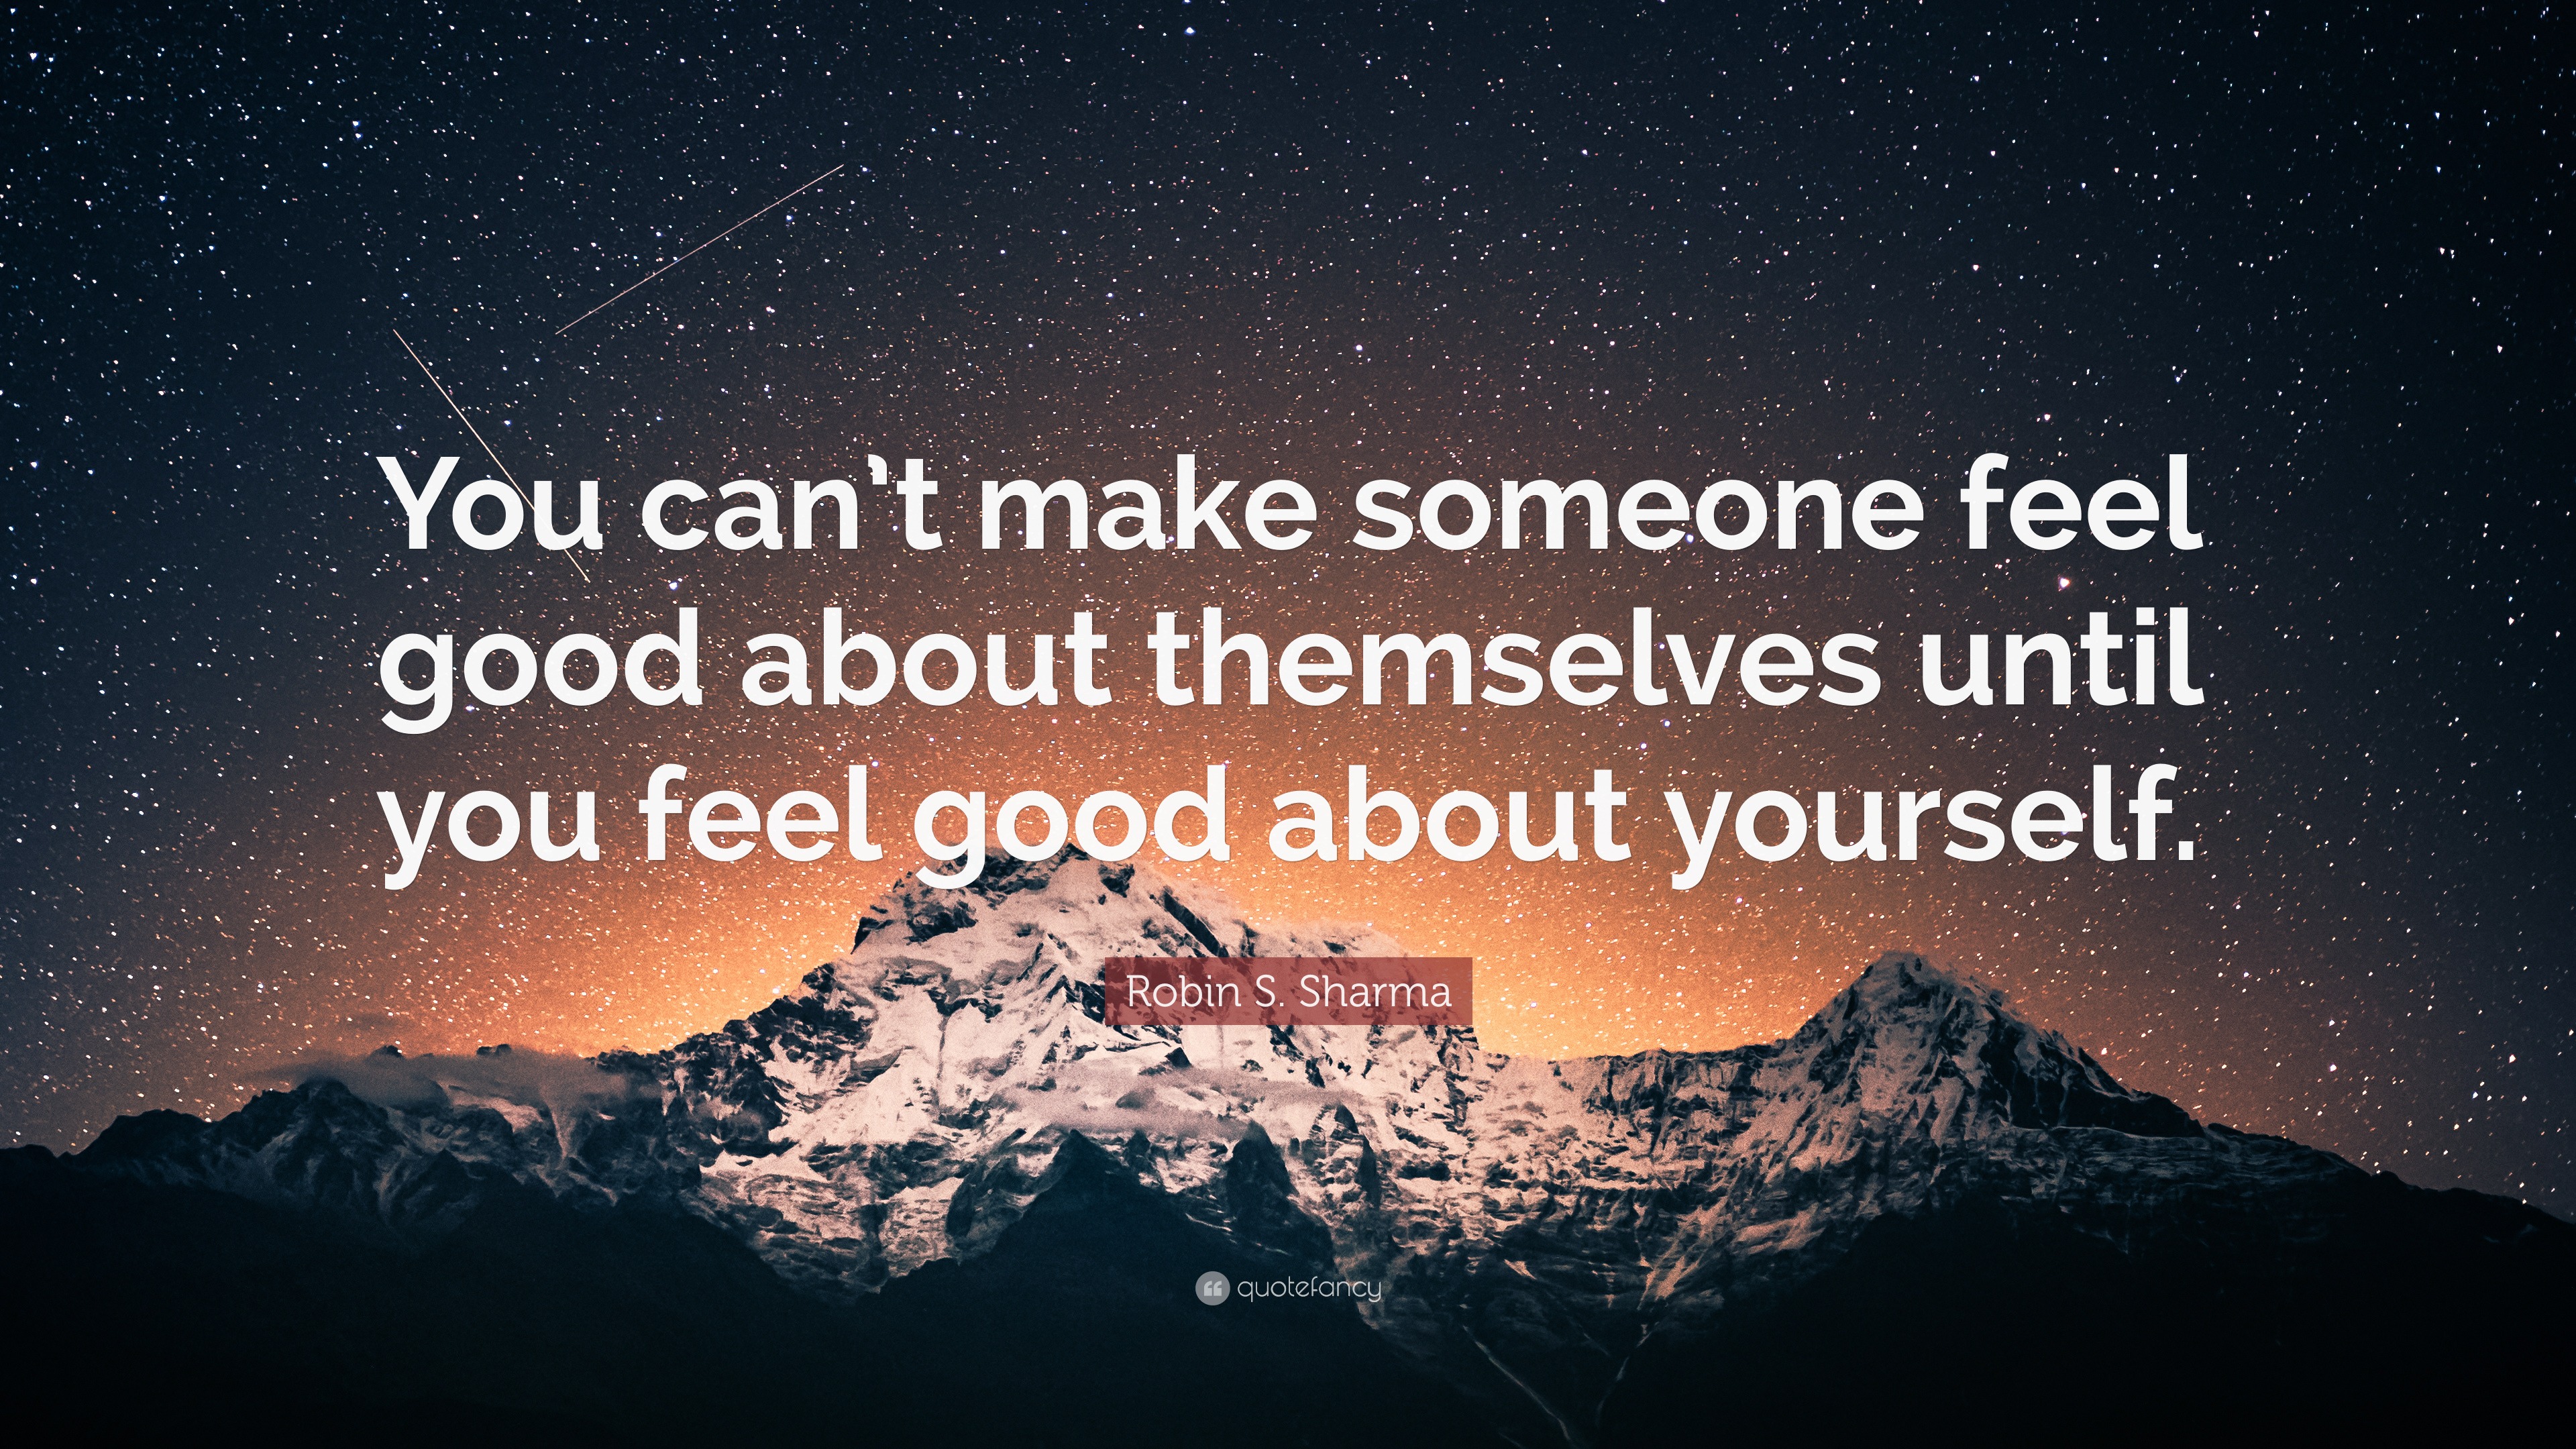 Robin S Sharma Quote  You can t make someone feel  good  